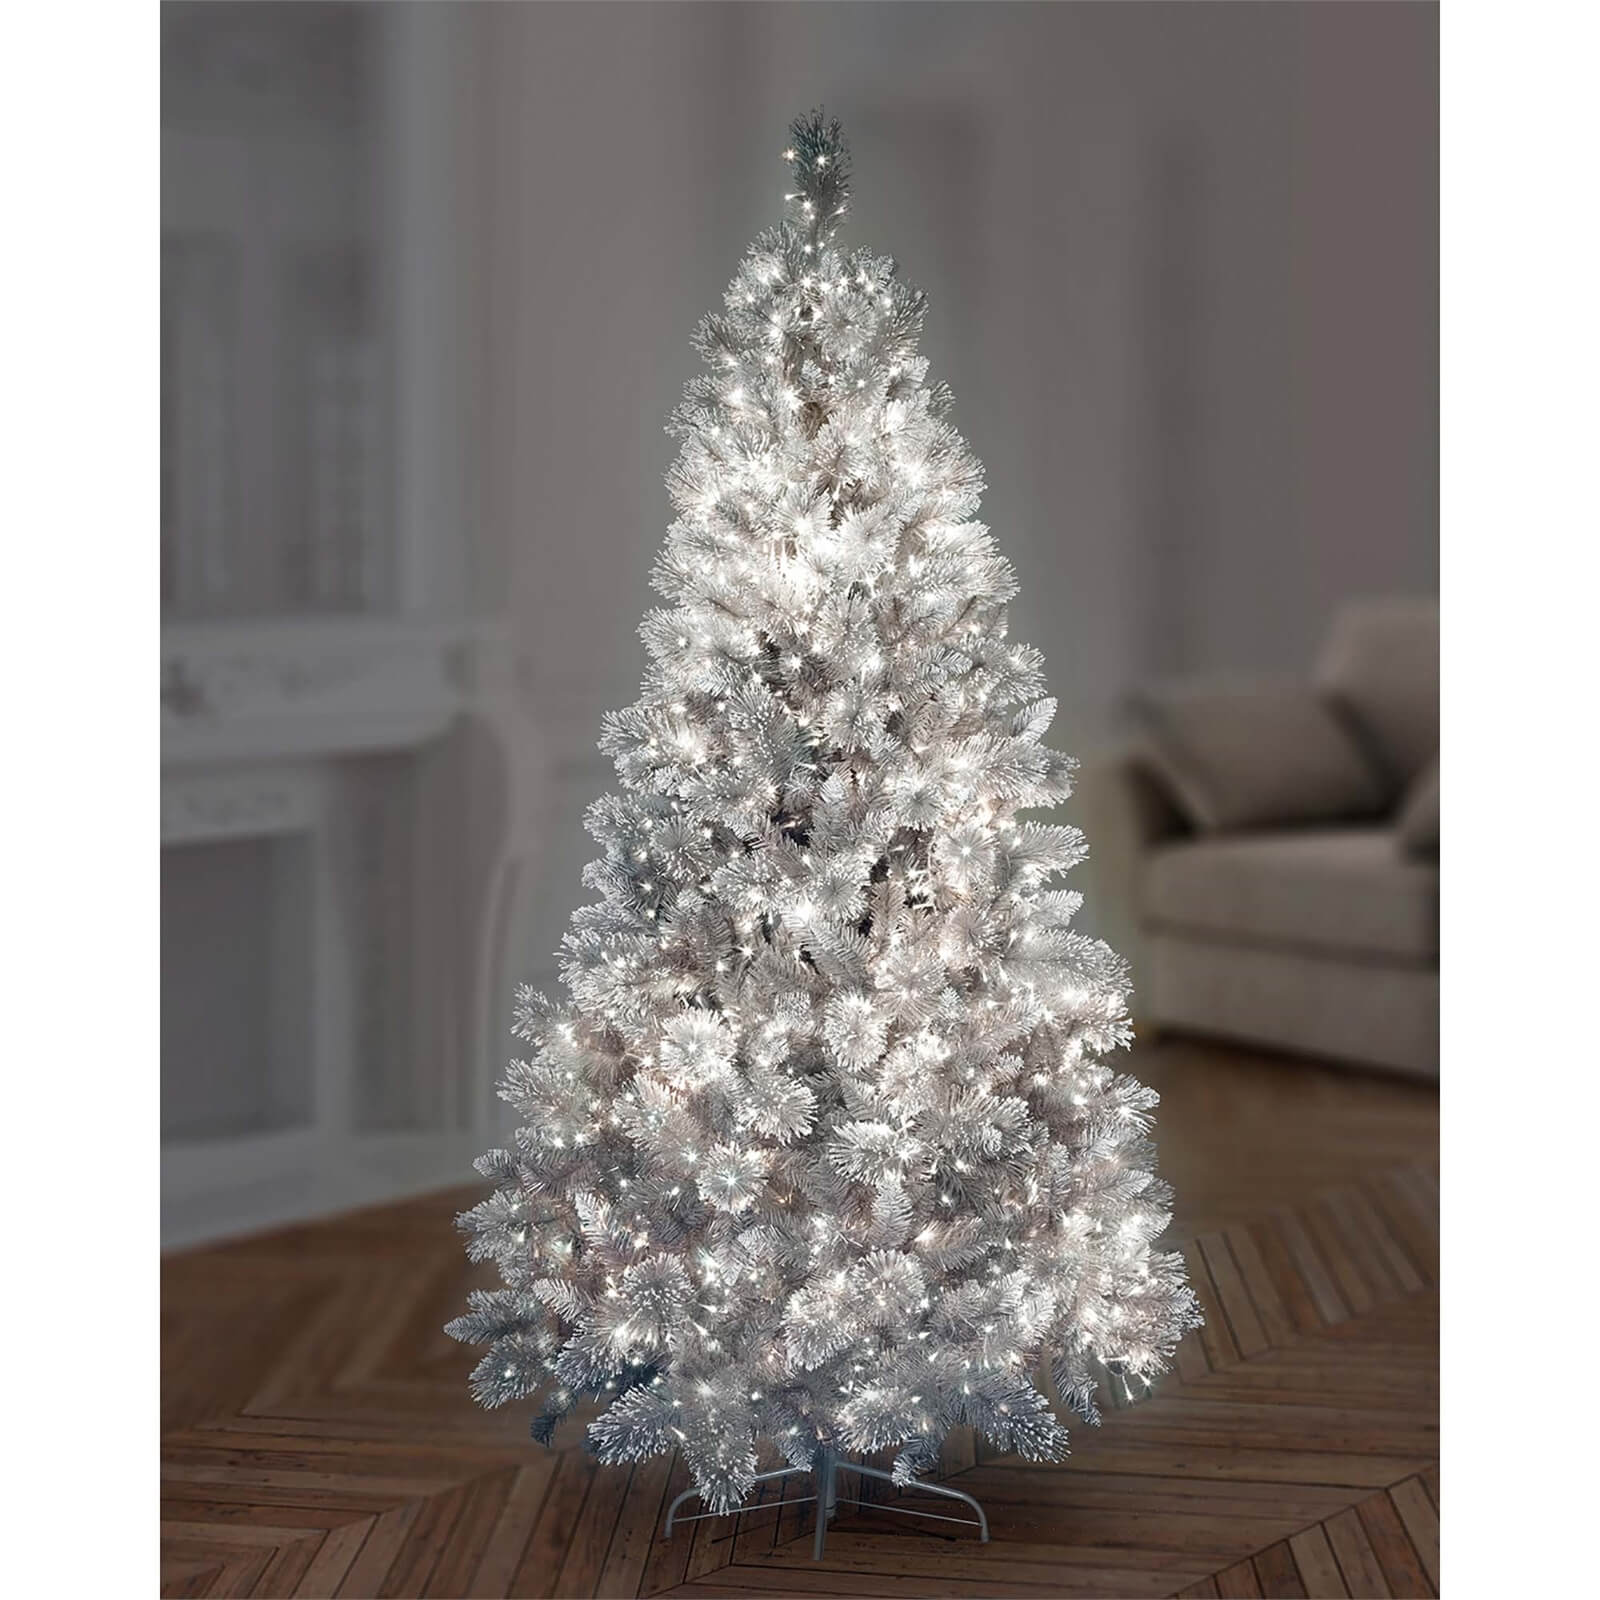 1000 White Multiaction LED Treebrights (with Timer)